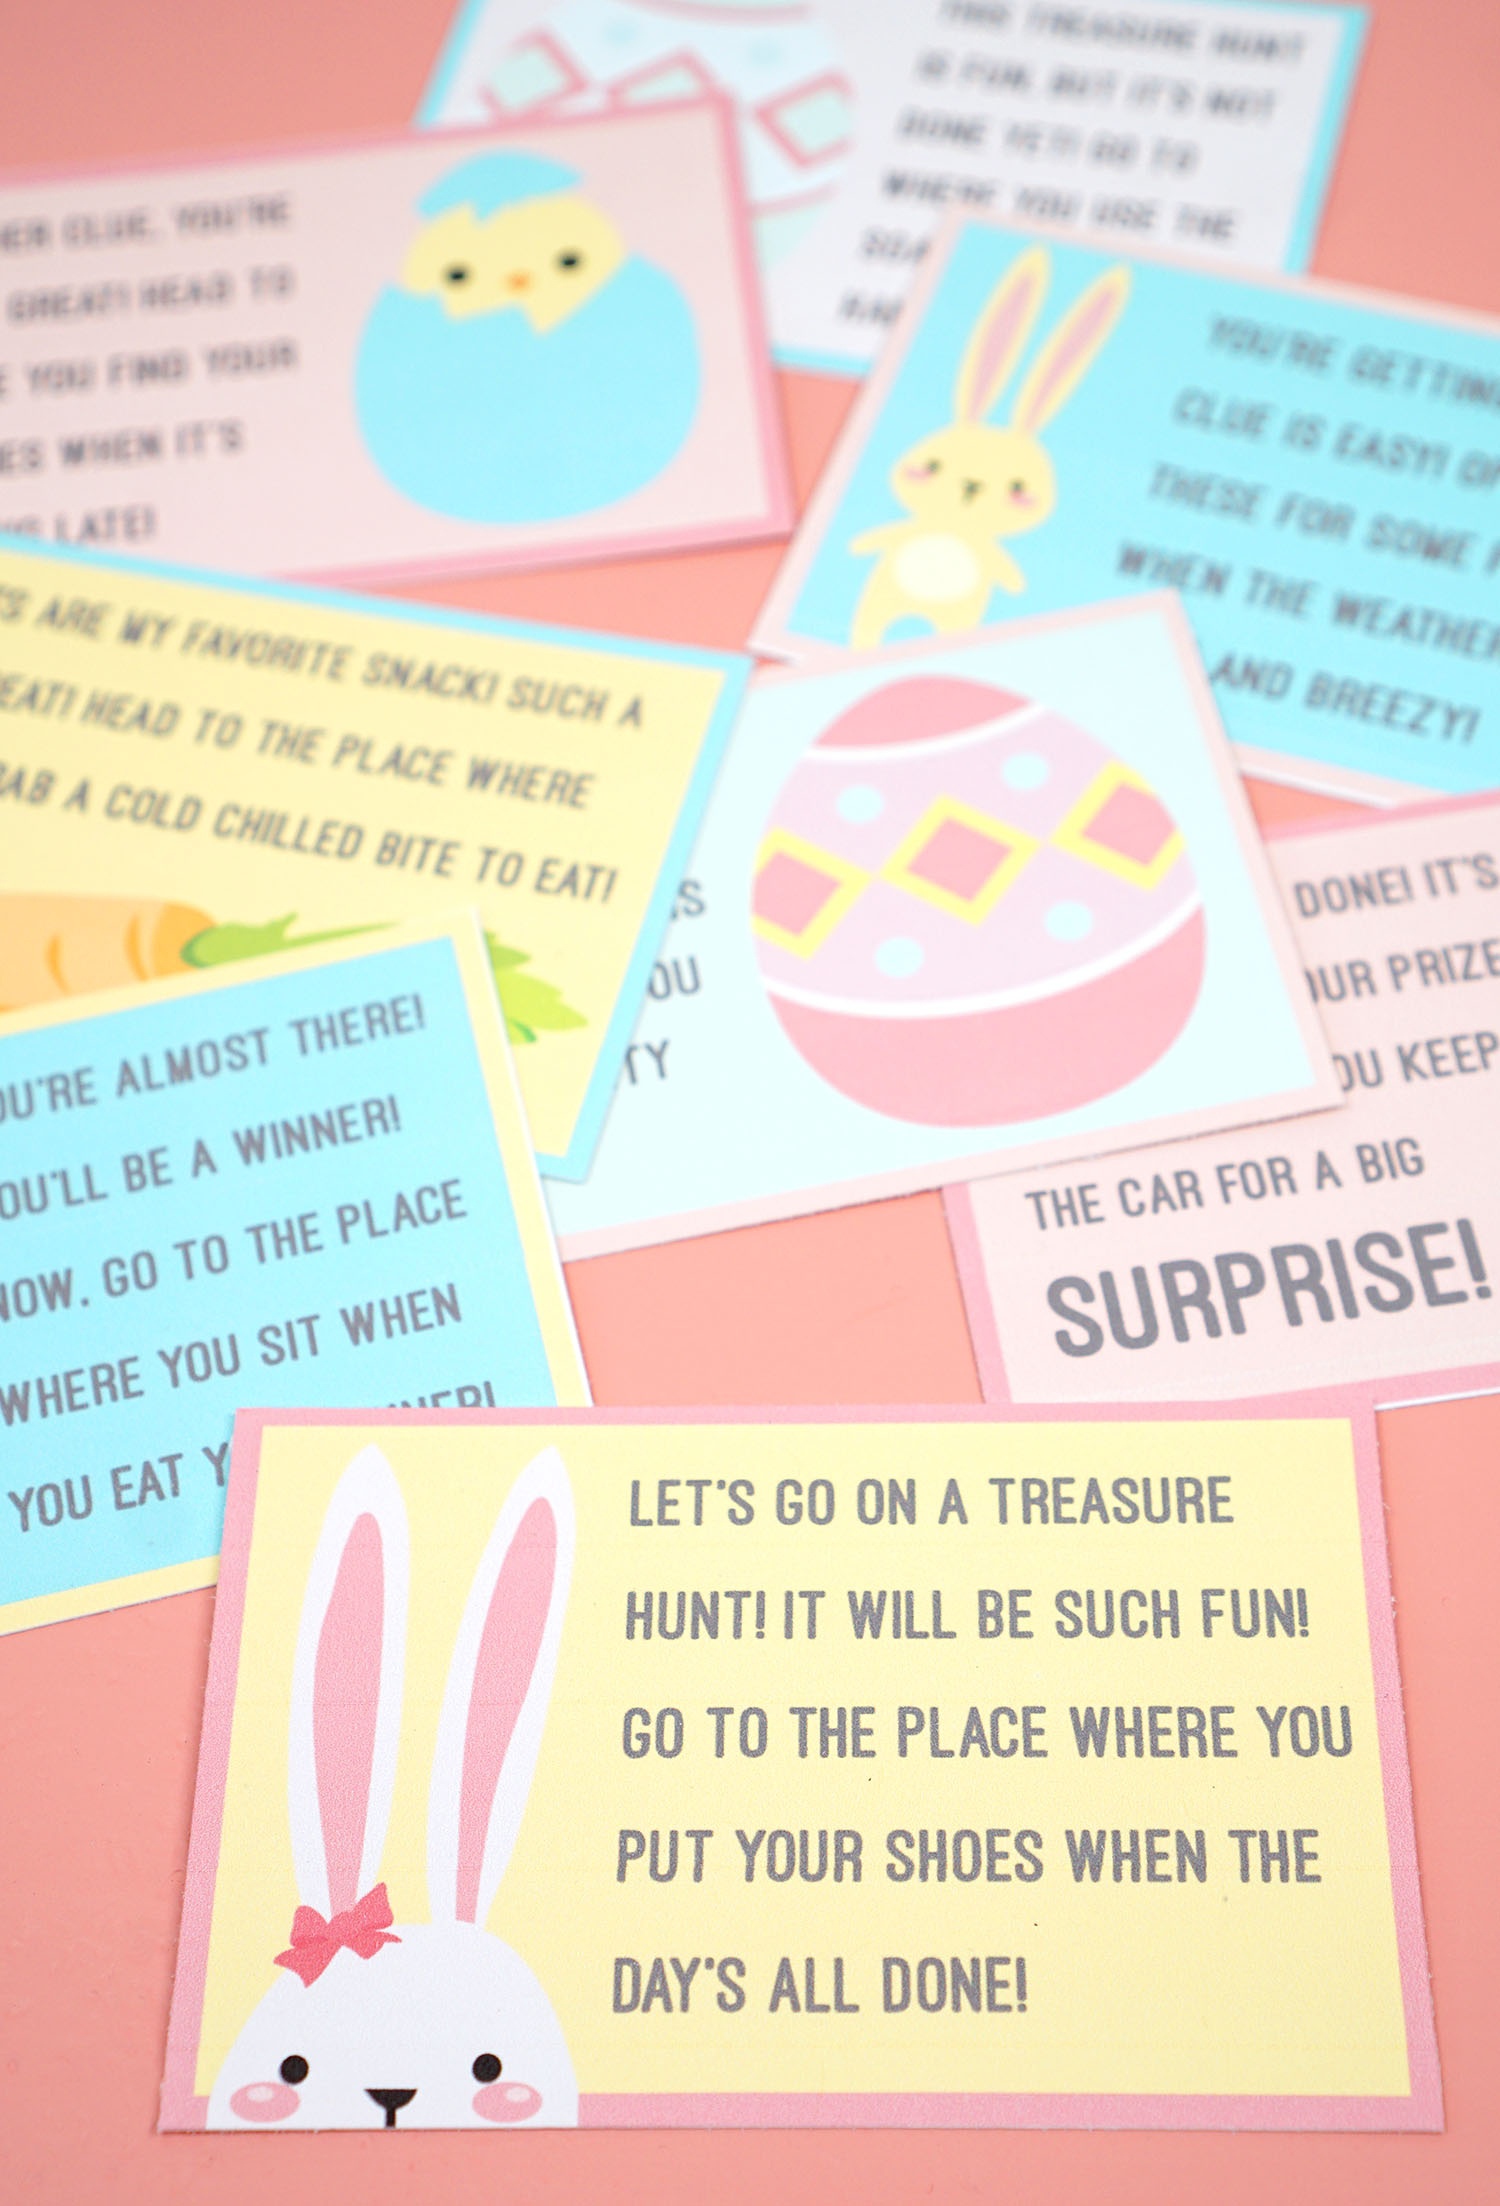 Easter Scavenger Hunt - Free Printable! - Happiness Is Homemade - Easter Scavenger Hunt Riddles Free Printable